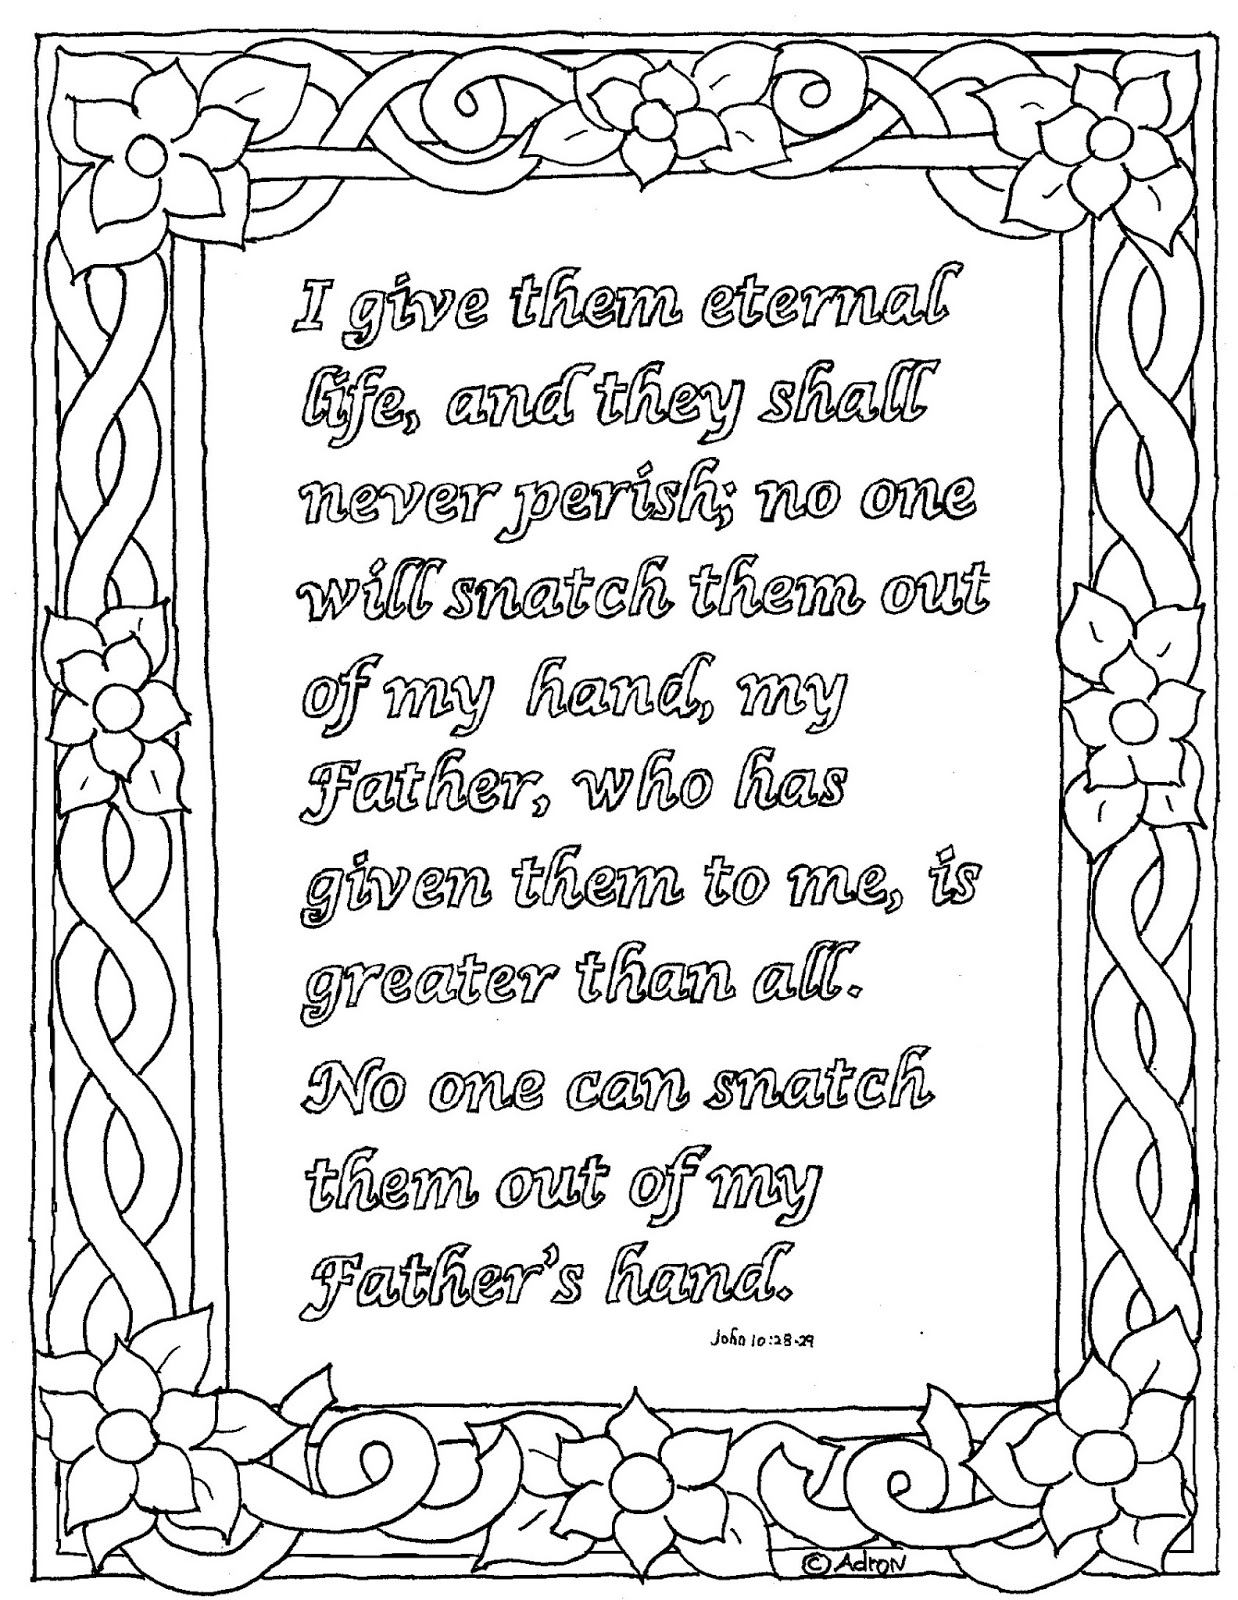 Coloring Pages for Kids by Mr. Adron: Printable Bible Verse, "No one